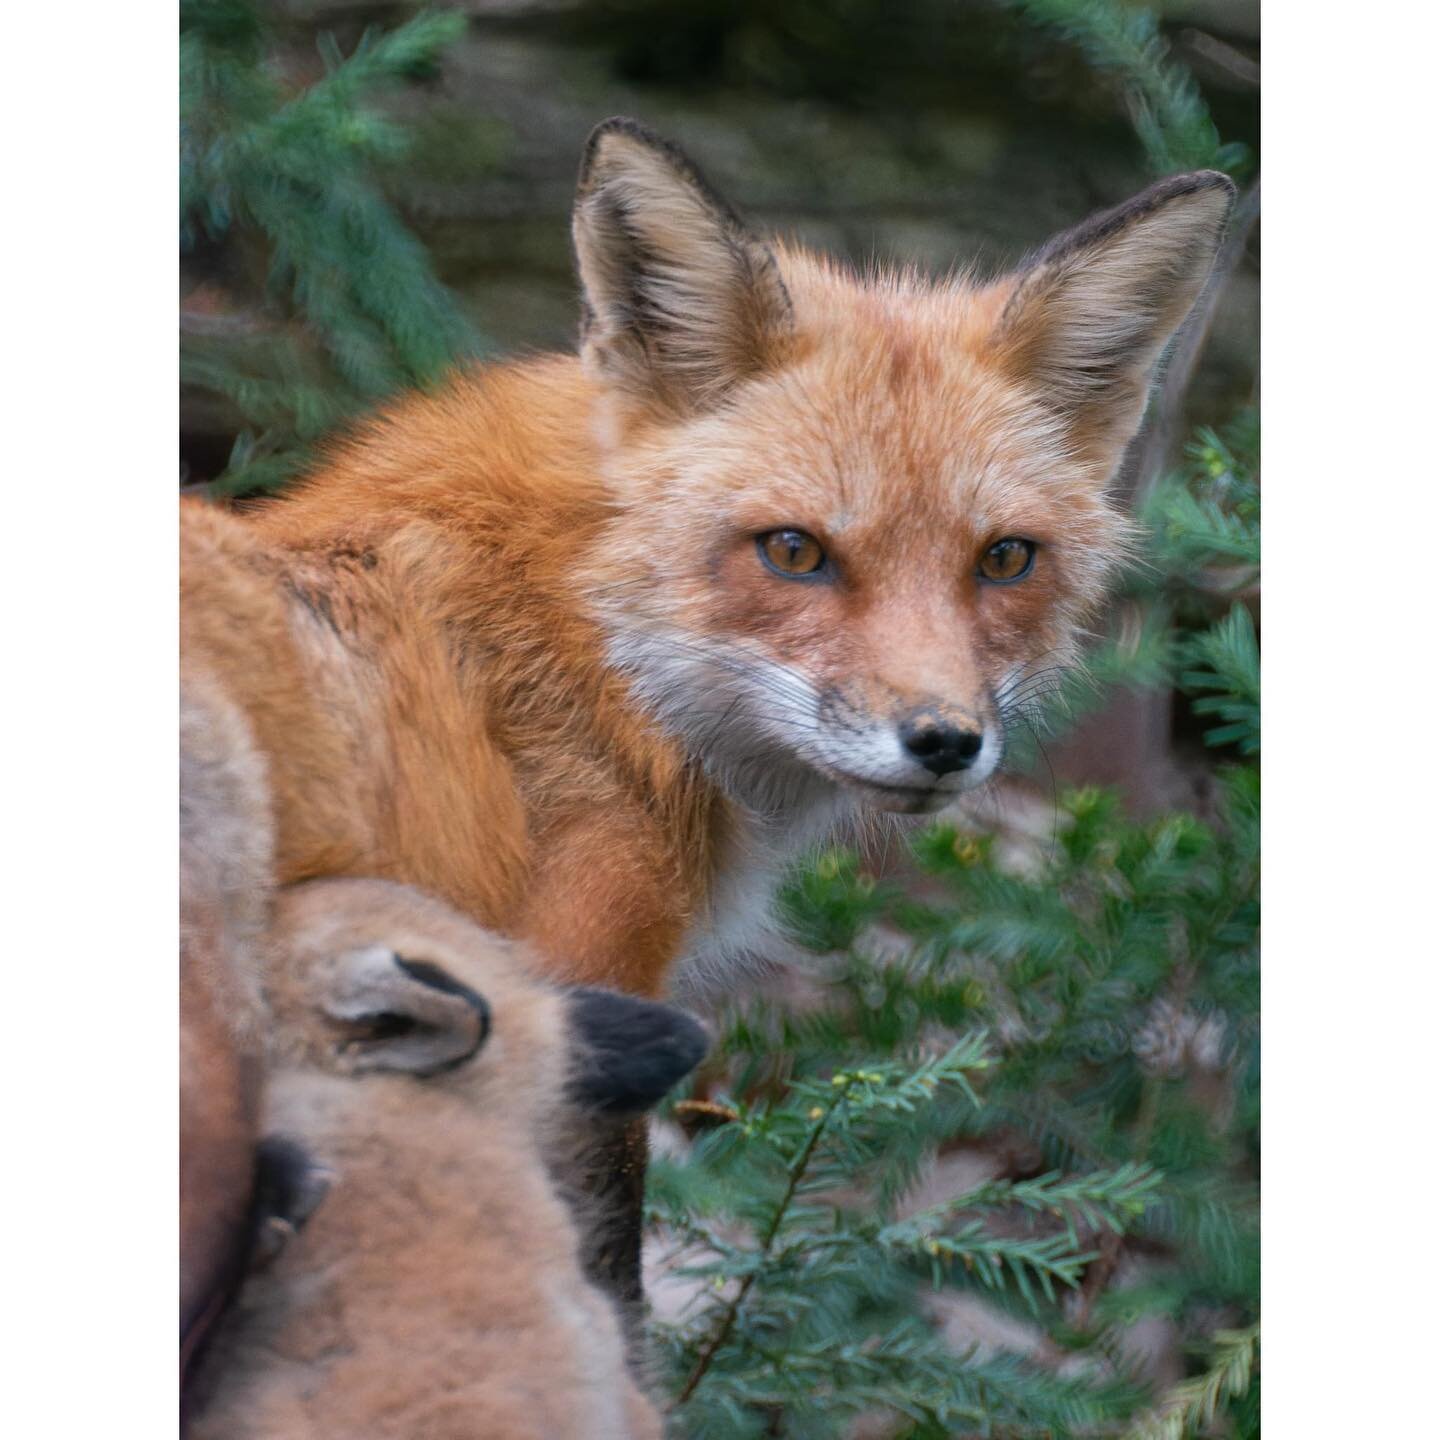 A really special experience. Louis L'&Eacute;tourneau asked me if I wanted to meet him this morning, to see if I could get some photos of the new fox kits that had joined the world. I was fortunate enough last year to get some photos of the previous 